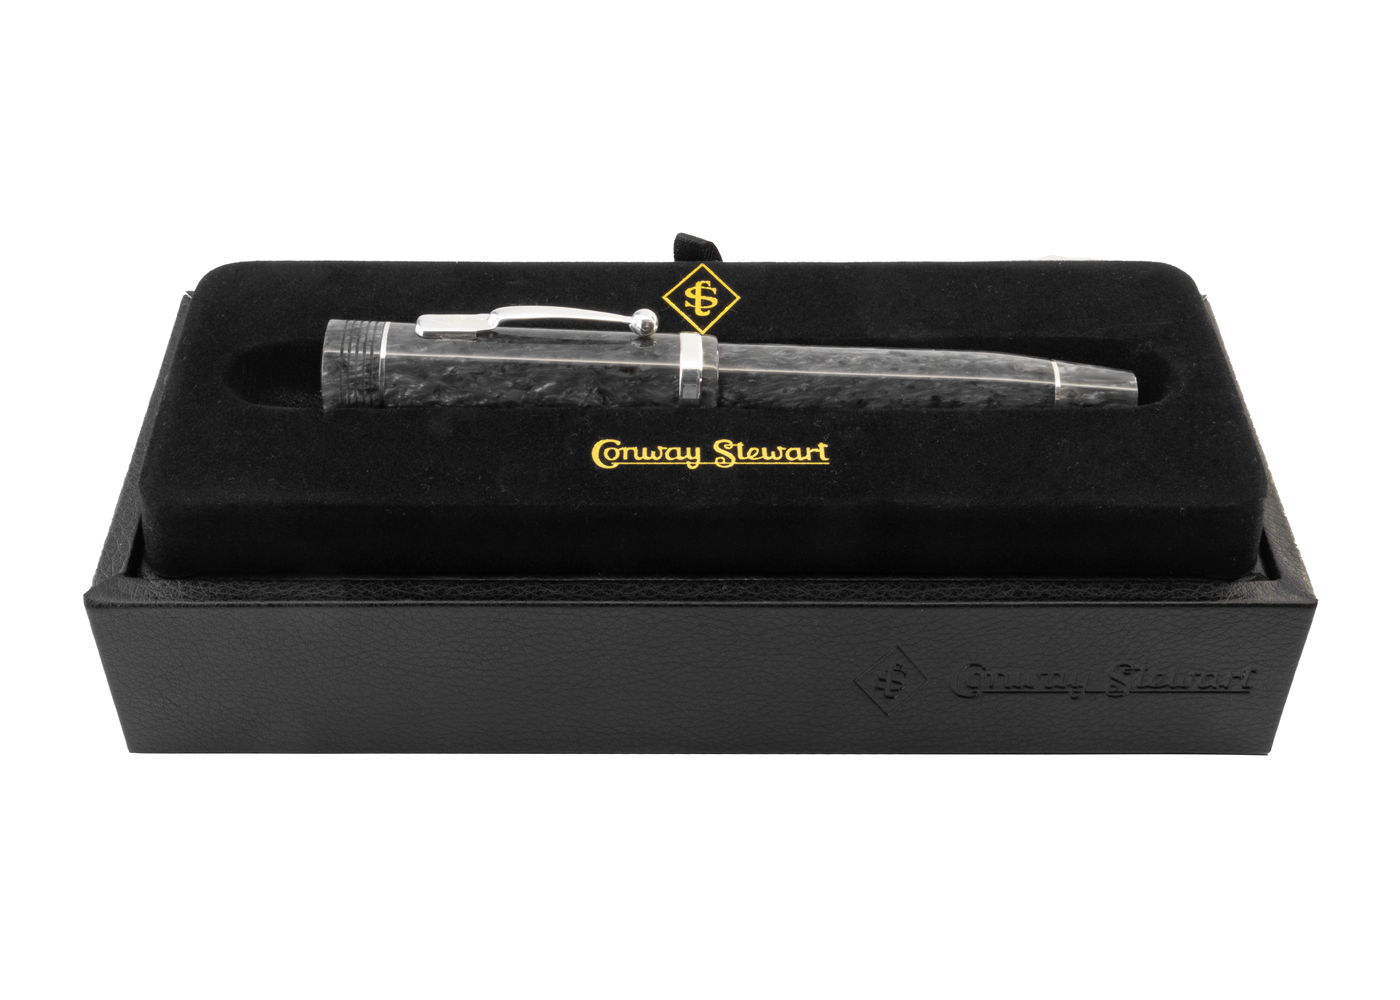 Conway Stewart Churchill Silver Storm with Silver Trim